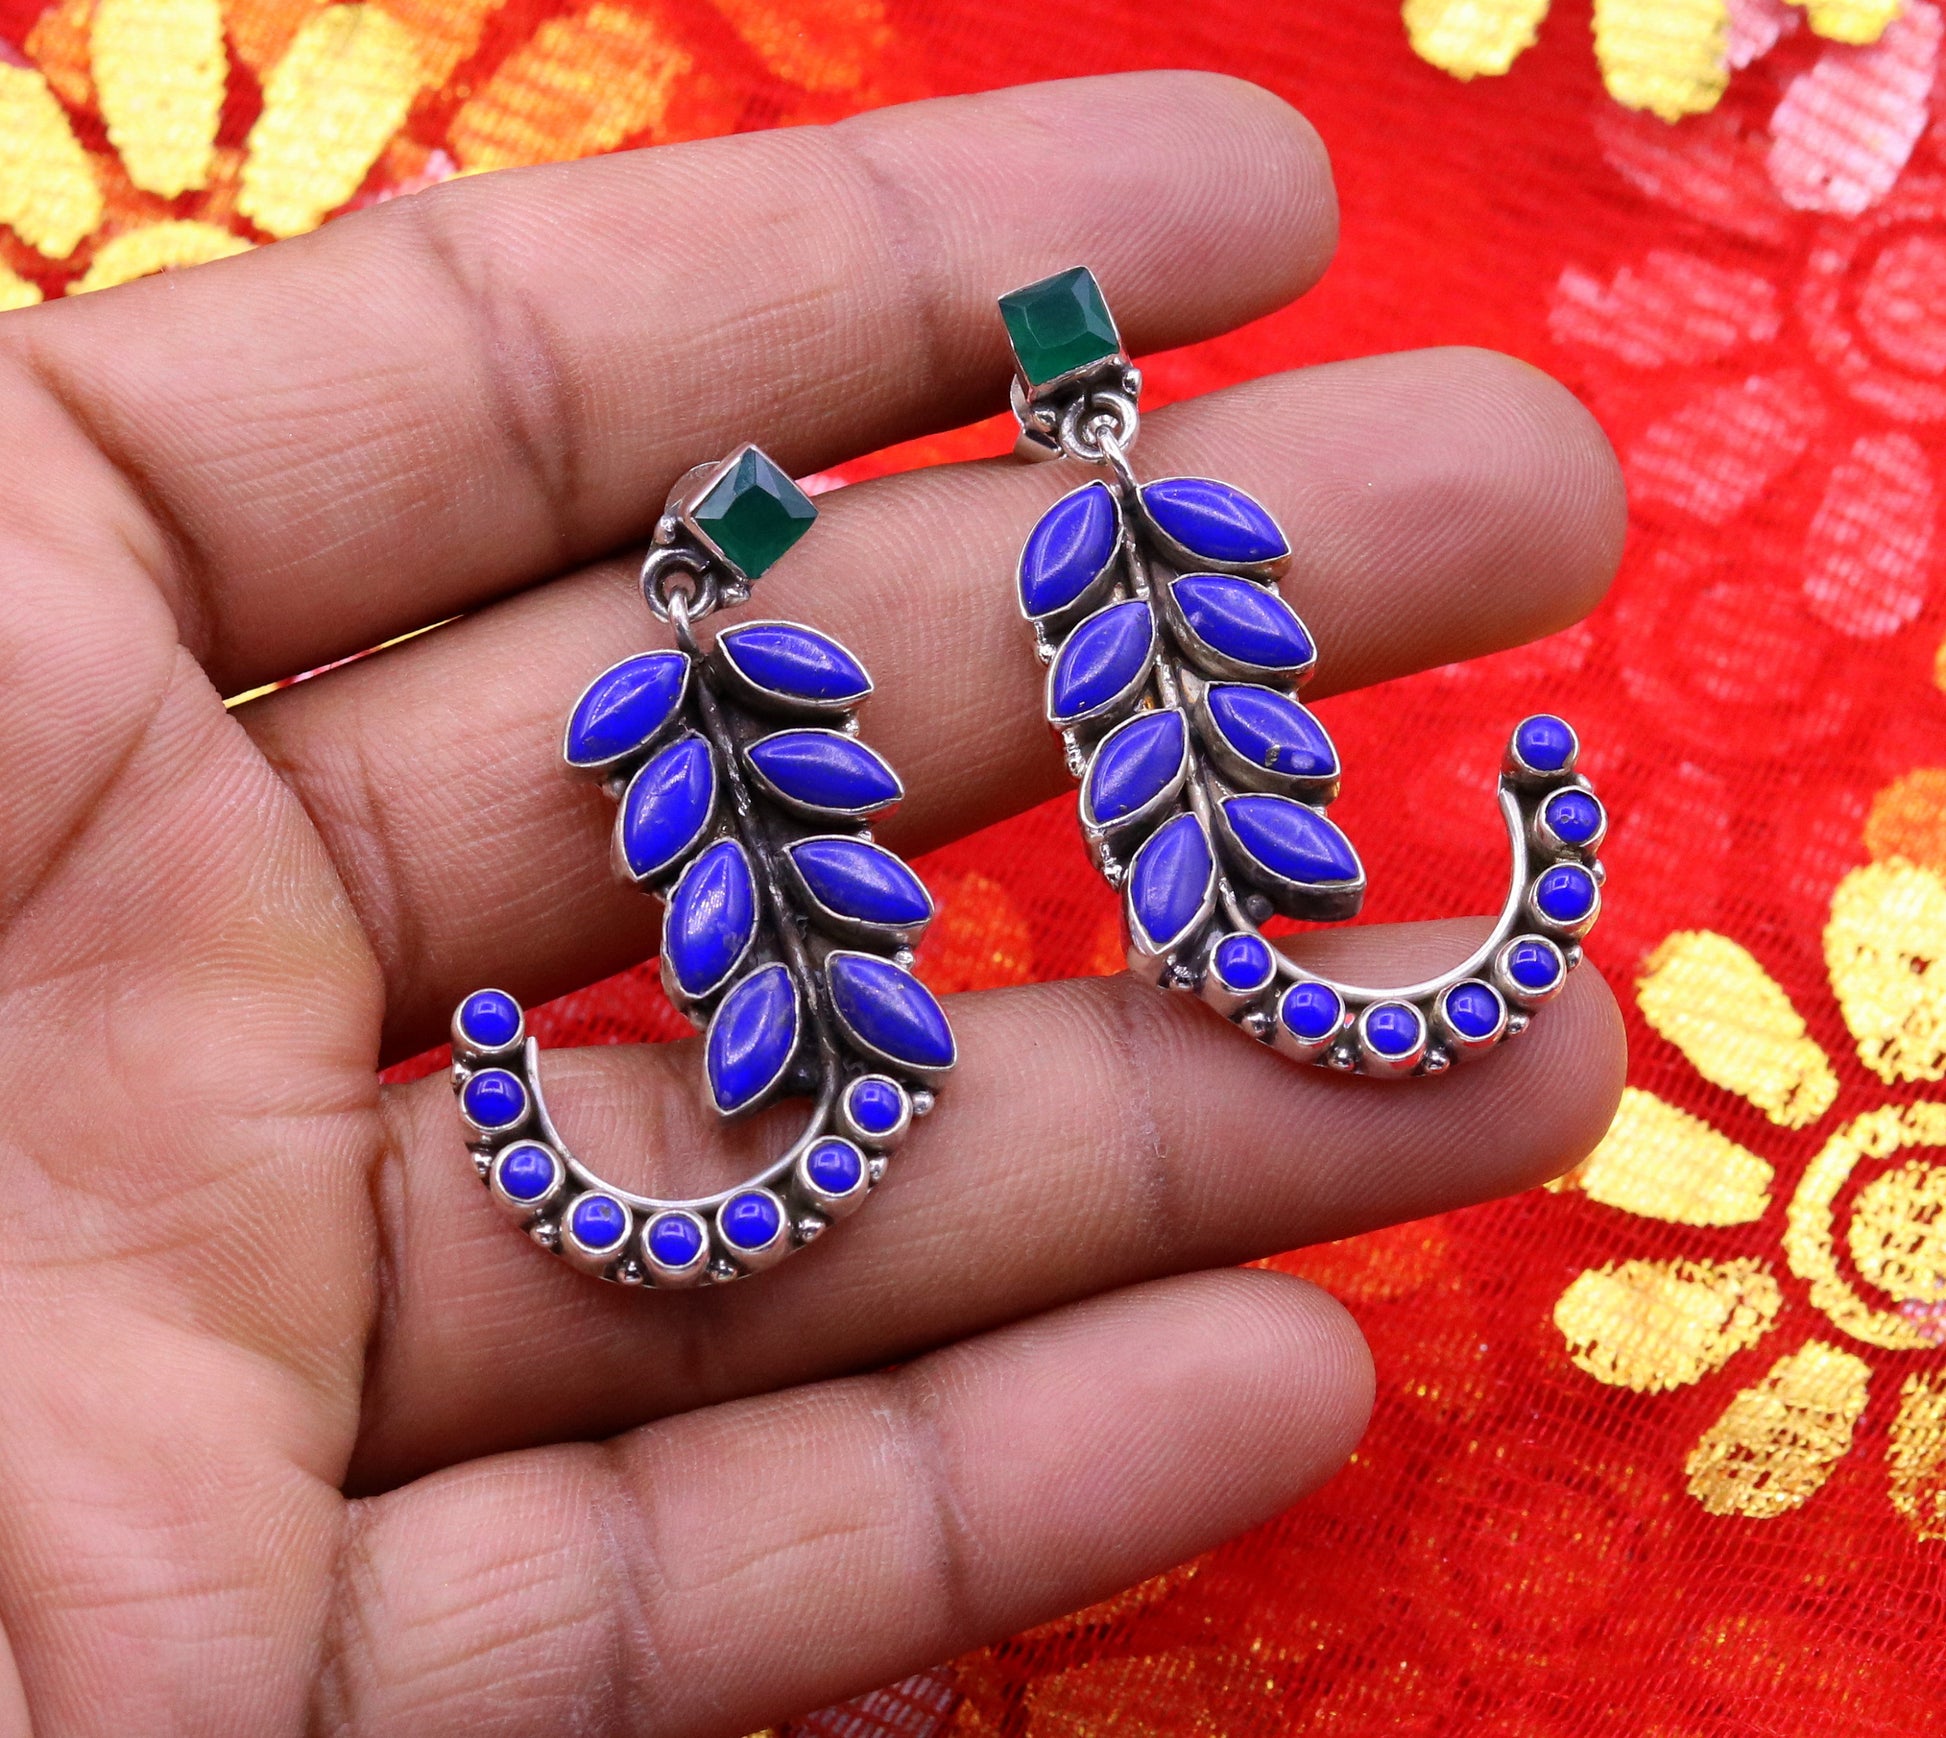 925 Sterling silver handmade fabulous leaf style designers gemstone jadau stud earring, excellent silver ear jewelry for gifting s721 - TRIBAL ORNAMENTS